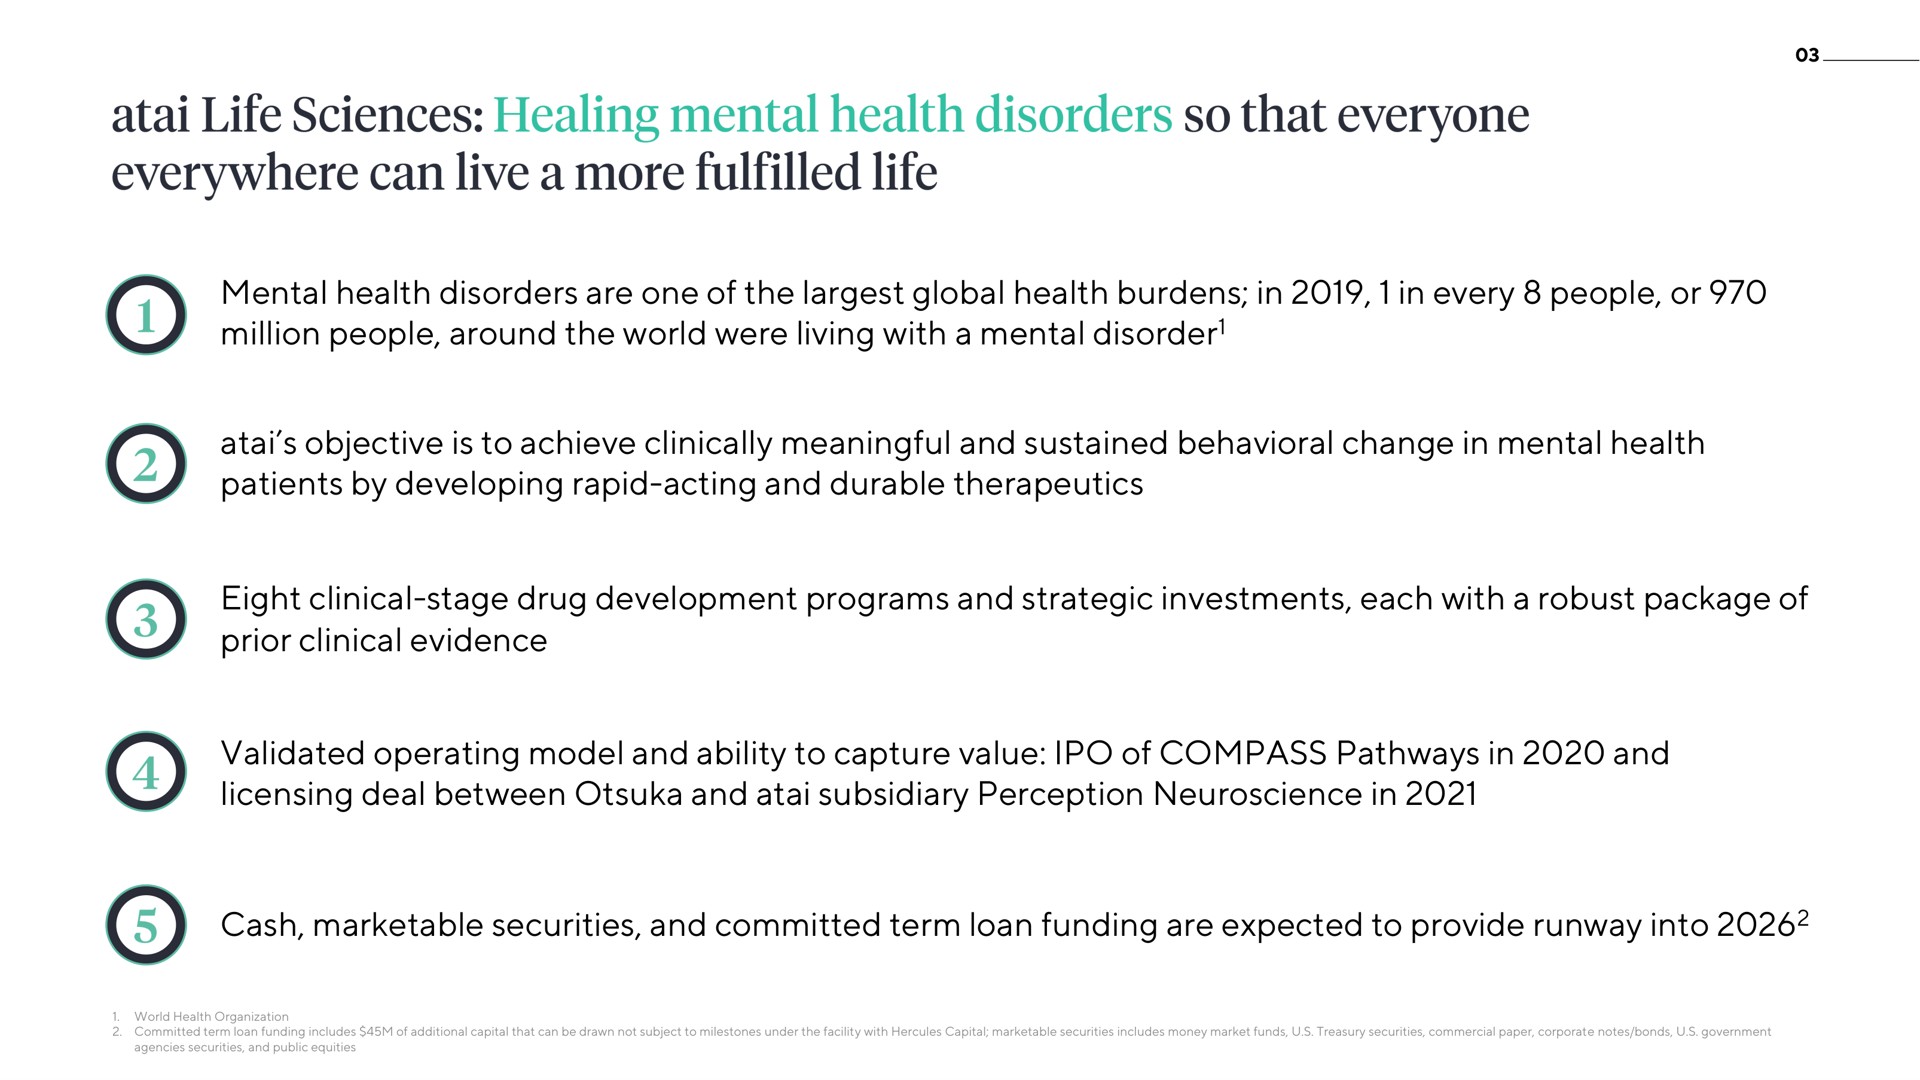 mental health disorders are one of the global health burdens in in every people or million people around the world were living with a mental disorder objective is to achieve clinically meaningful and sustained behavioral change in mental health patients by developing rapid acting and durable therapeutics eight clinical stage drug development programs and strategic investments each with a robust package of prior clinical evidence validated operating model and ability to capture value of compass pathways in and licensing deal between and subsidiary perception in cash marketable securities and committed term loan funding are expected to provide runway into life sciences healing so that everyone everywhere can live more life | ATAI